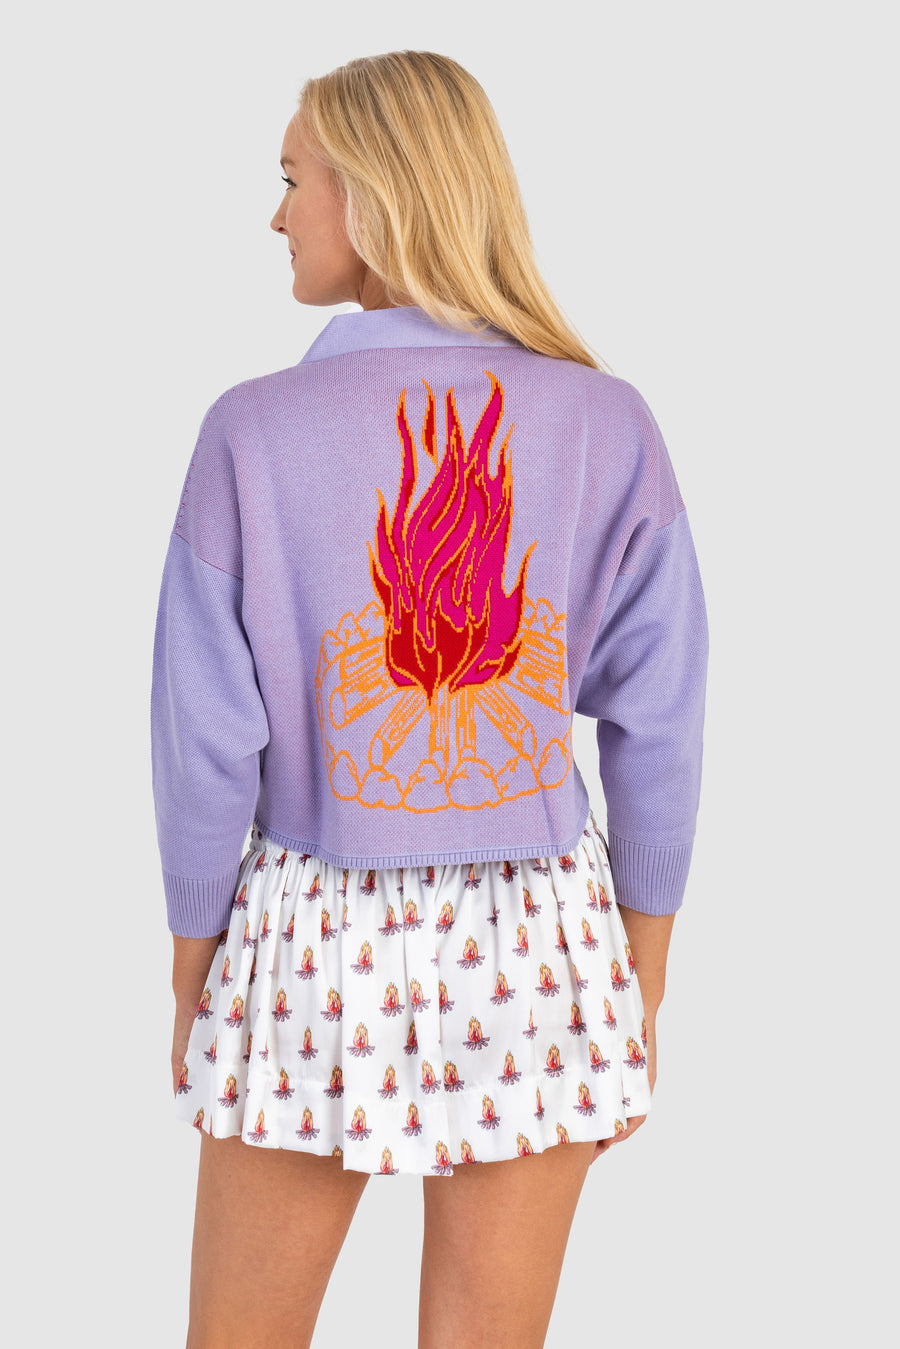 Avery Cardigan Fire *Limited*Edition*